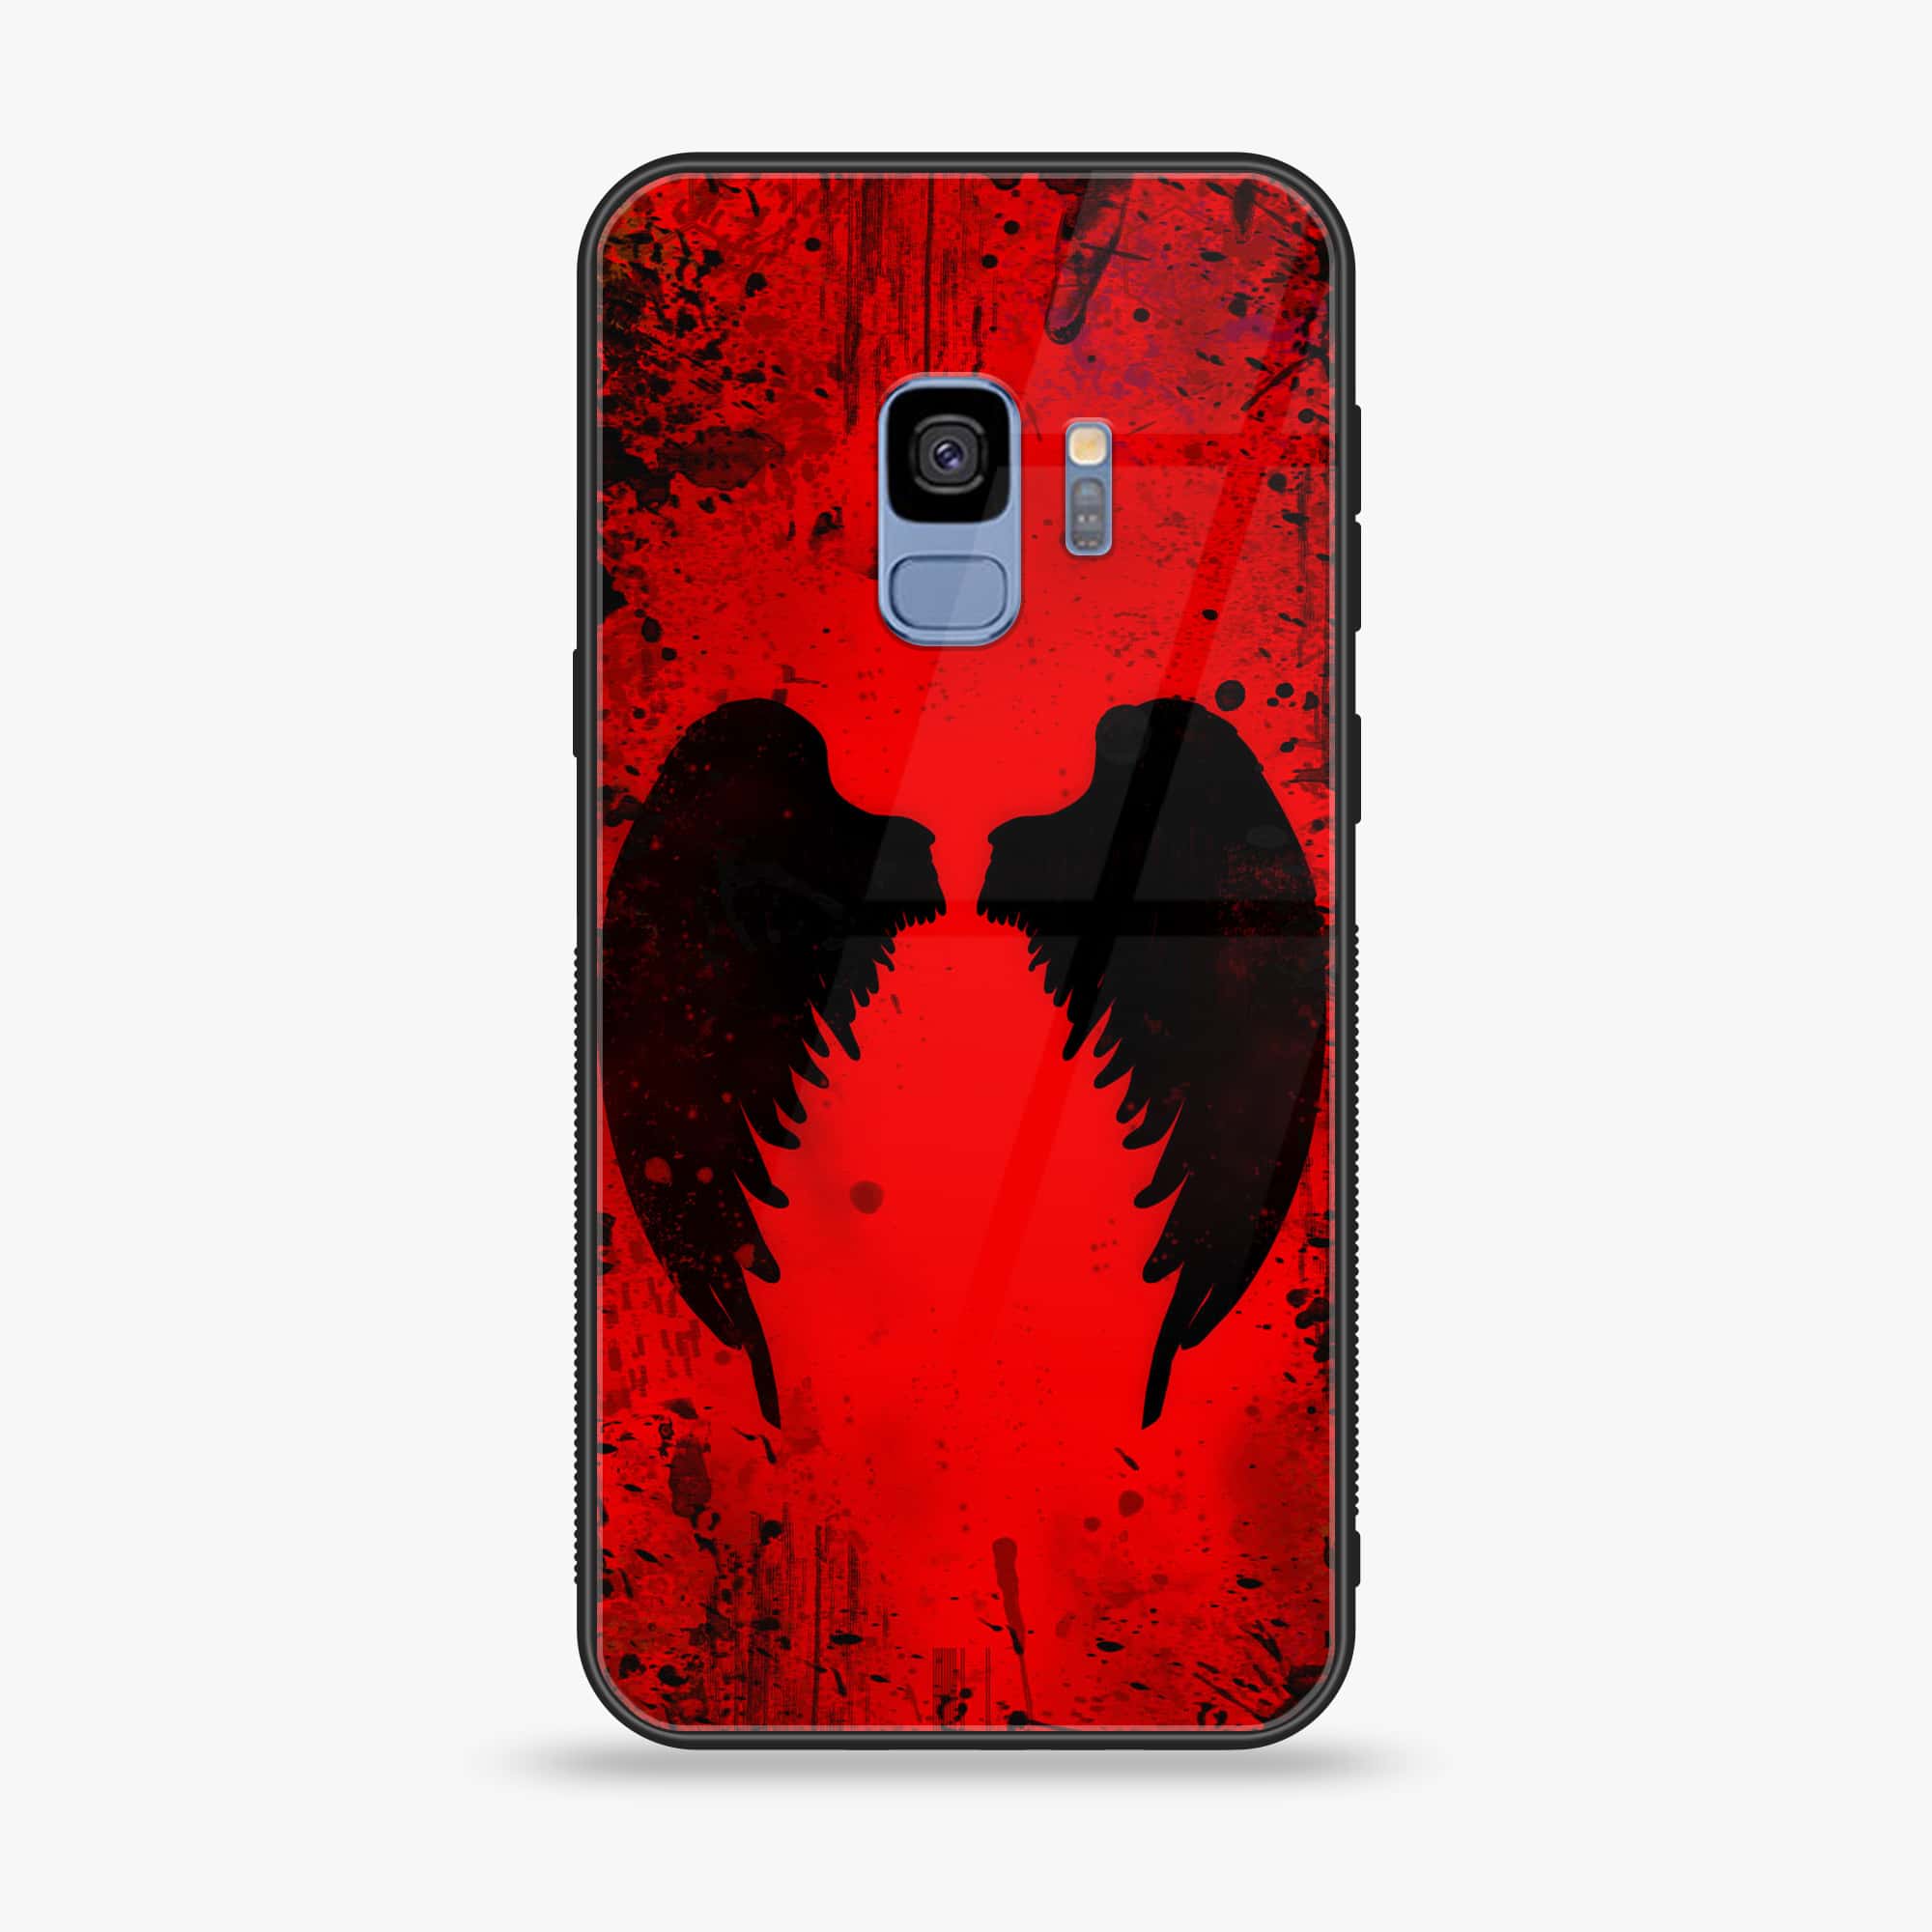 Galaxy S9 - Angel Wings 2.0 Series - Premium Printed Glass soft Bumper shock Proof Case